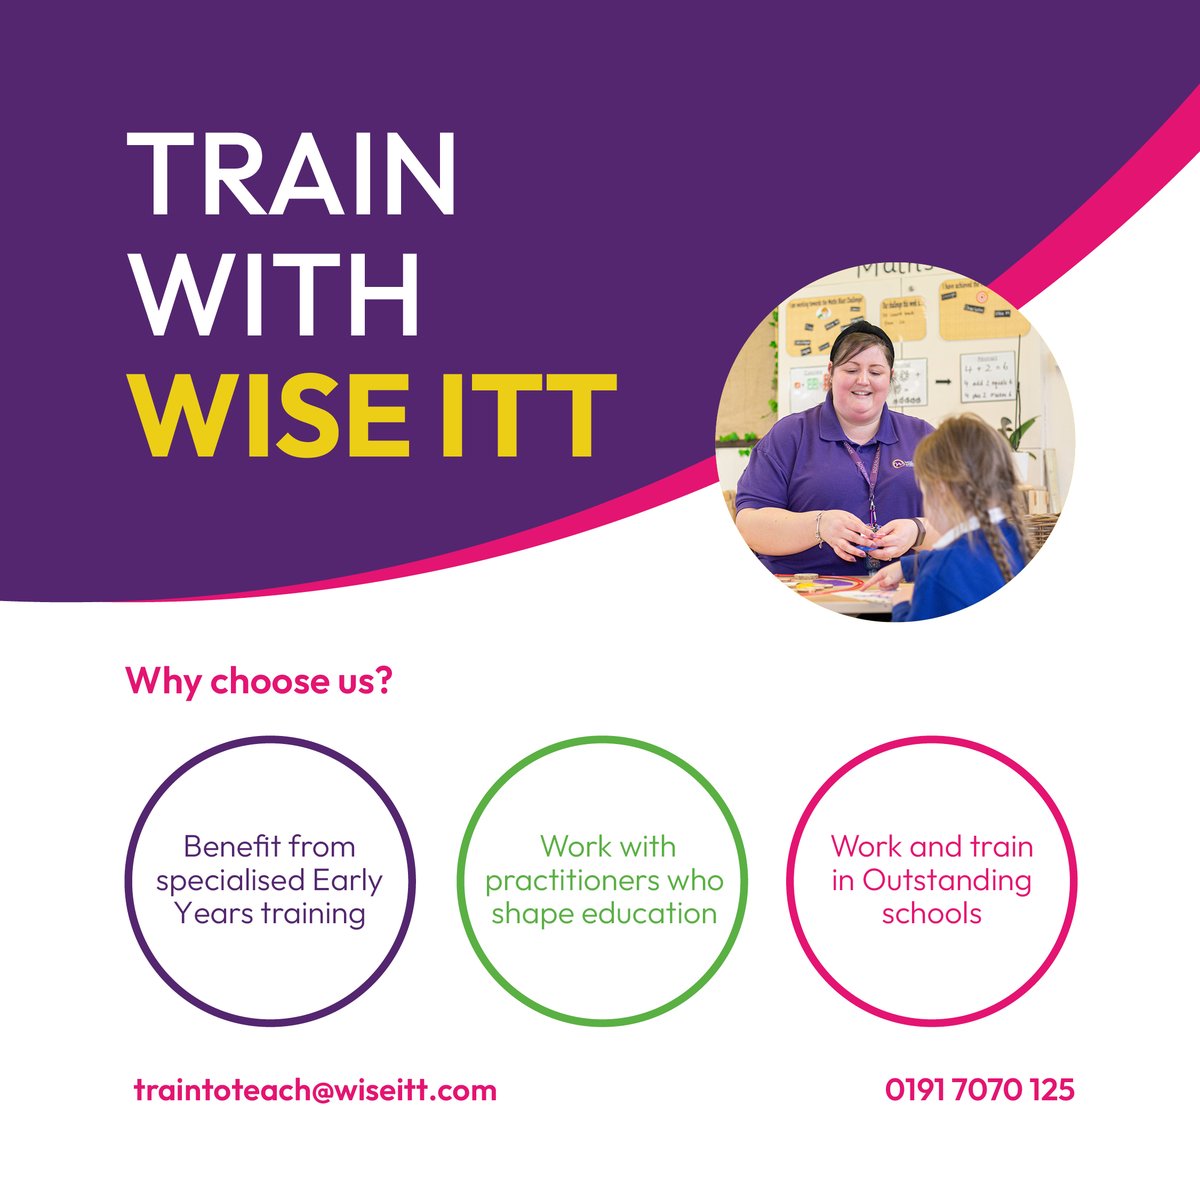 We are happy to support @WISE_ITT with teacher training, using some of our best practice tips in the early years settings! If you or someone you know is interested in becoming a teacher, get in touch with WISE ITT today!

wiseacademies.co.uk/wise-itt/
#WISEITT #EarlyYearsteaching